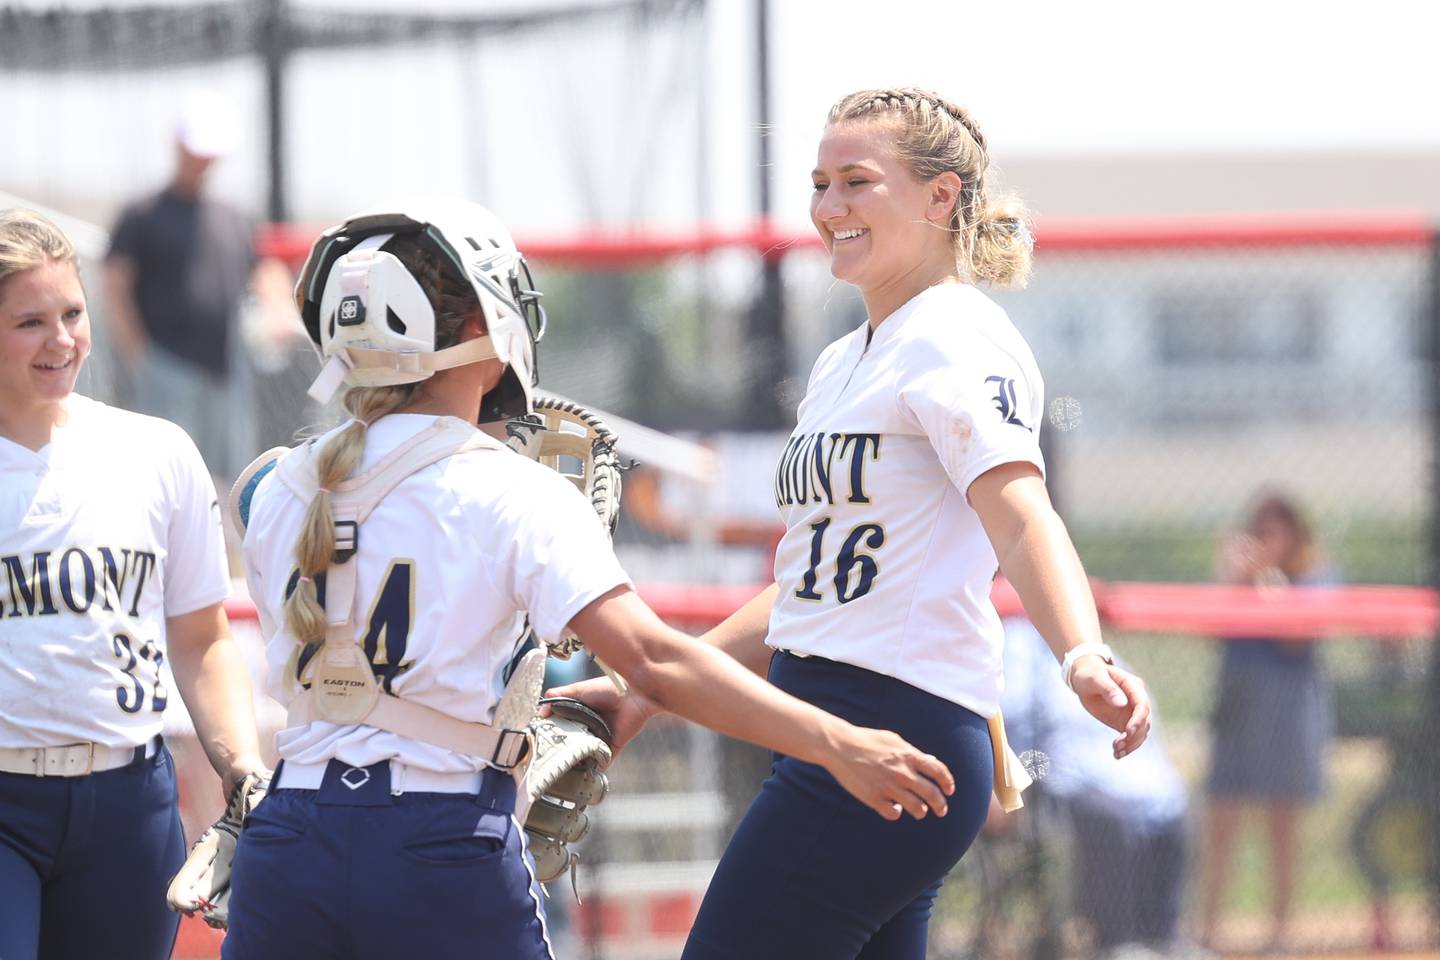 Lemont’s Sage Mardjetko, right, is greeted by Frankie Rita after a strike out to end the top of the 12th inning against Antioch in the Class 3A state championship game on Saturday, June 10, 2023 in Peoria.